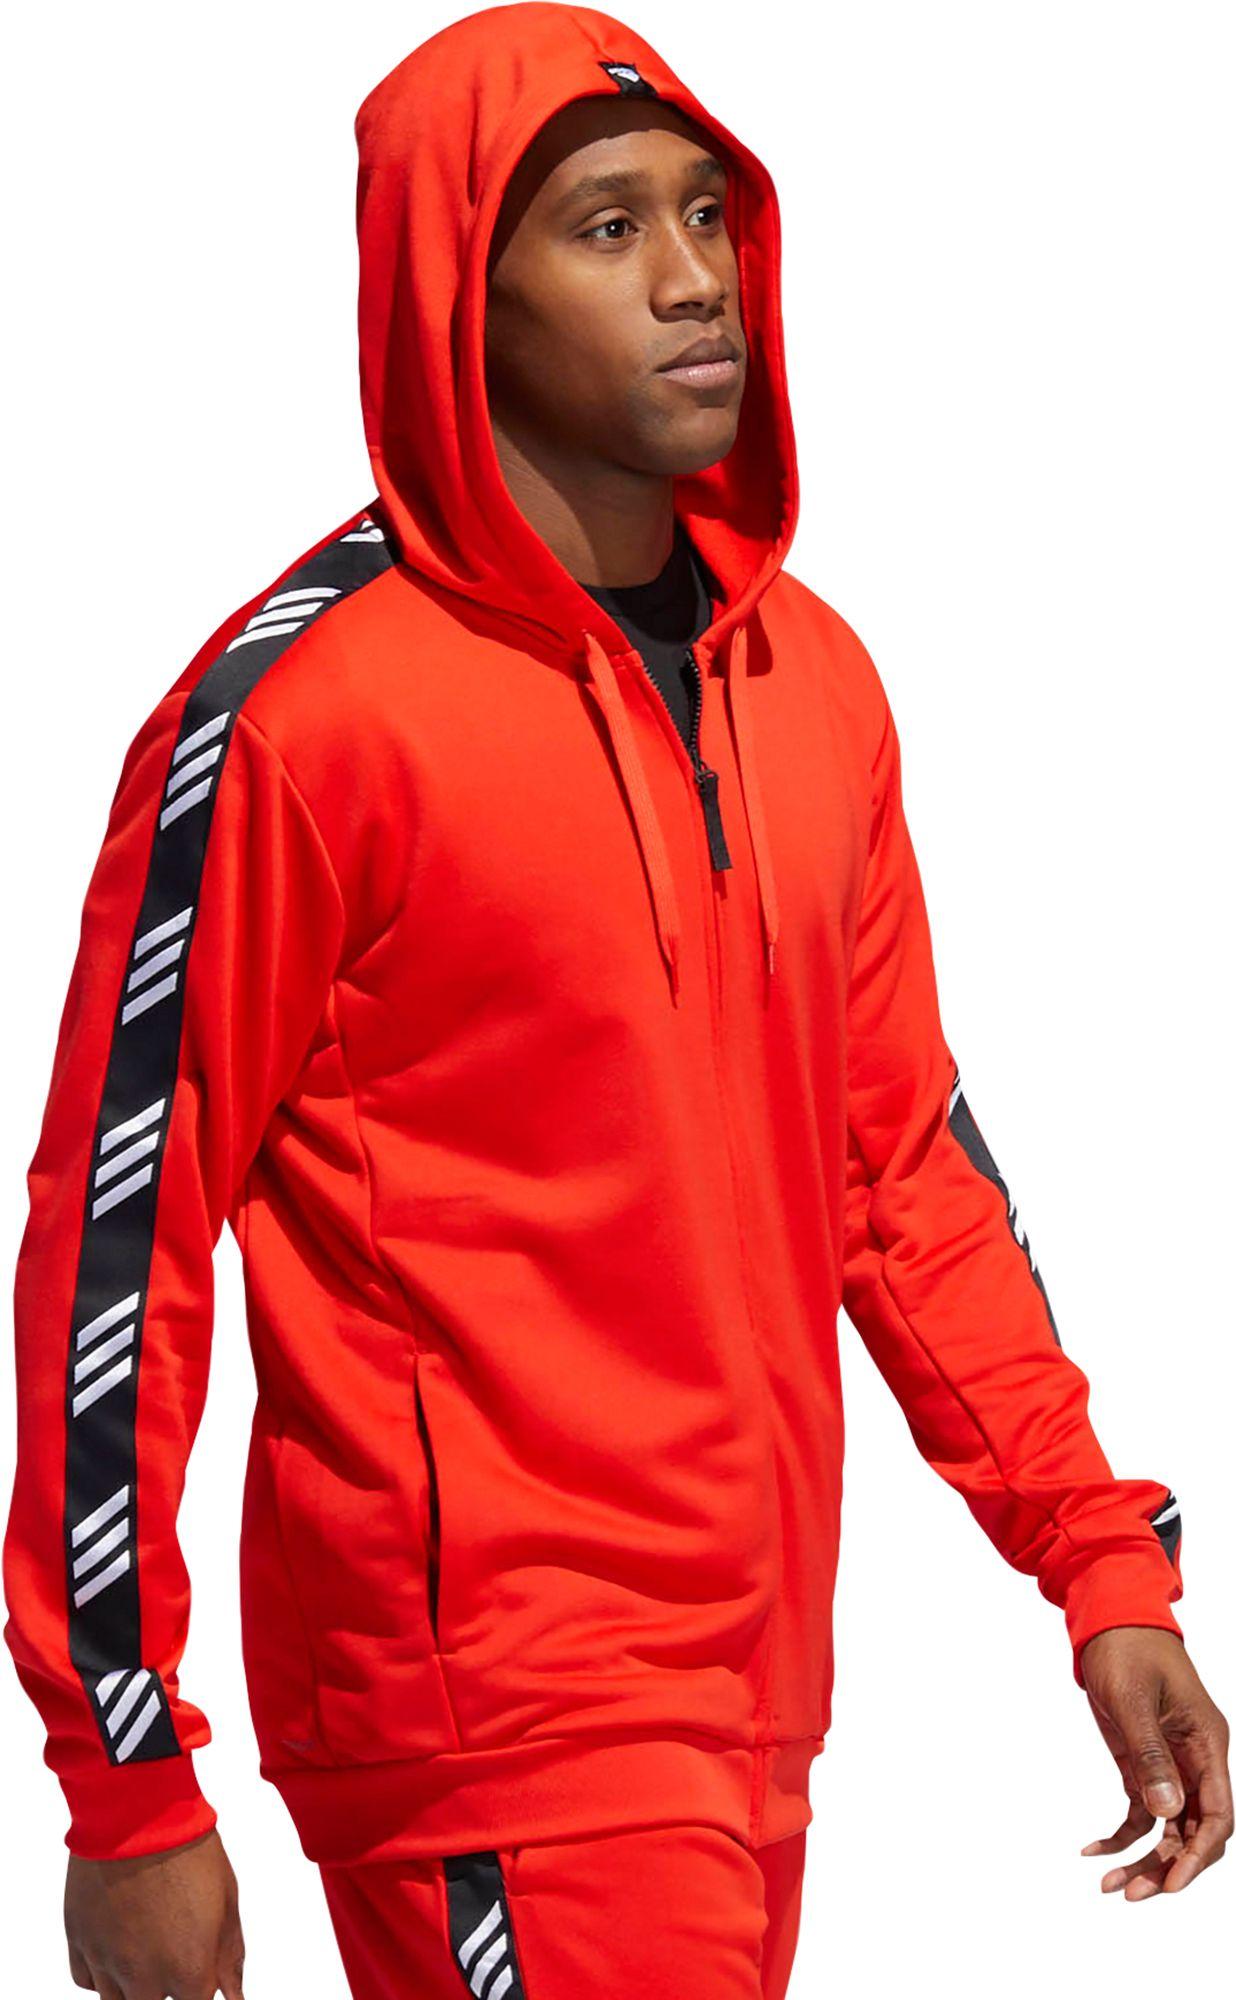 adidas Synthetic Pro Madness Basketball Hoodie in Red/Black (Red) for